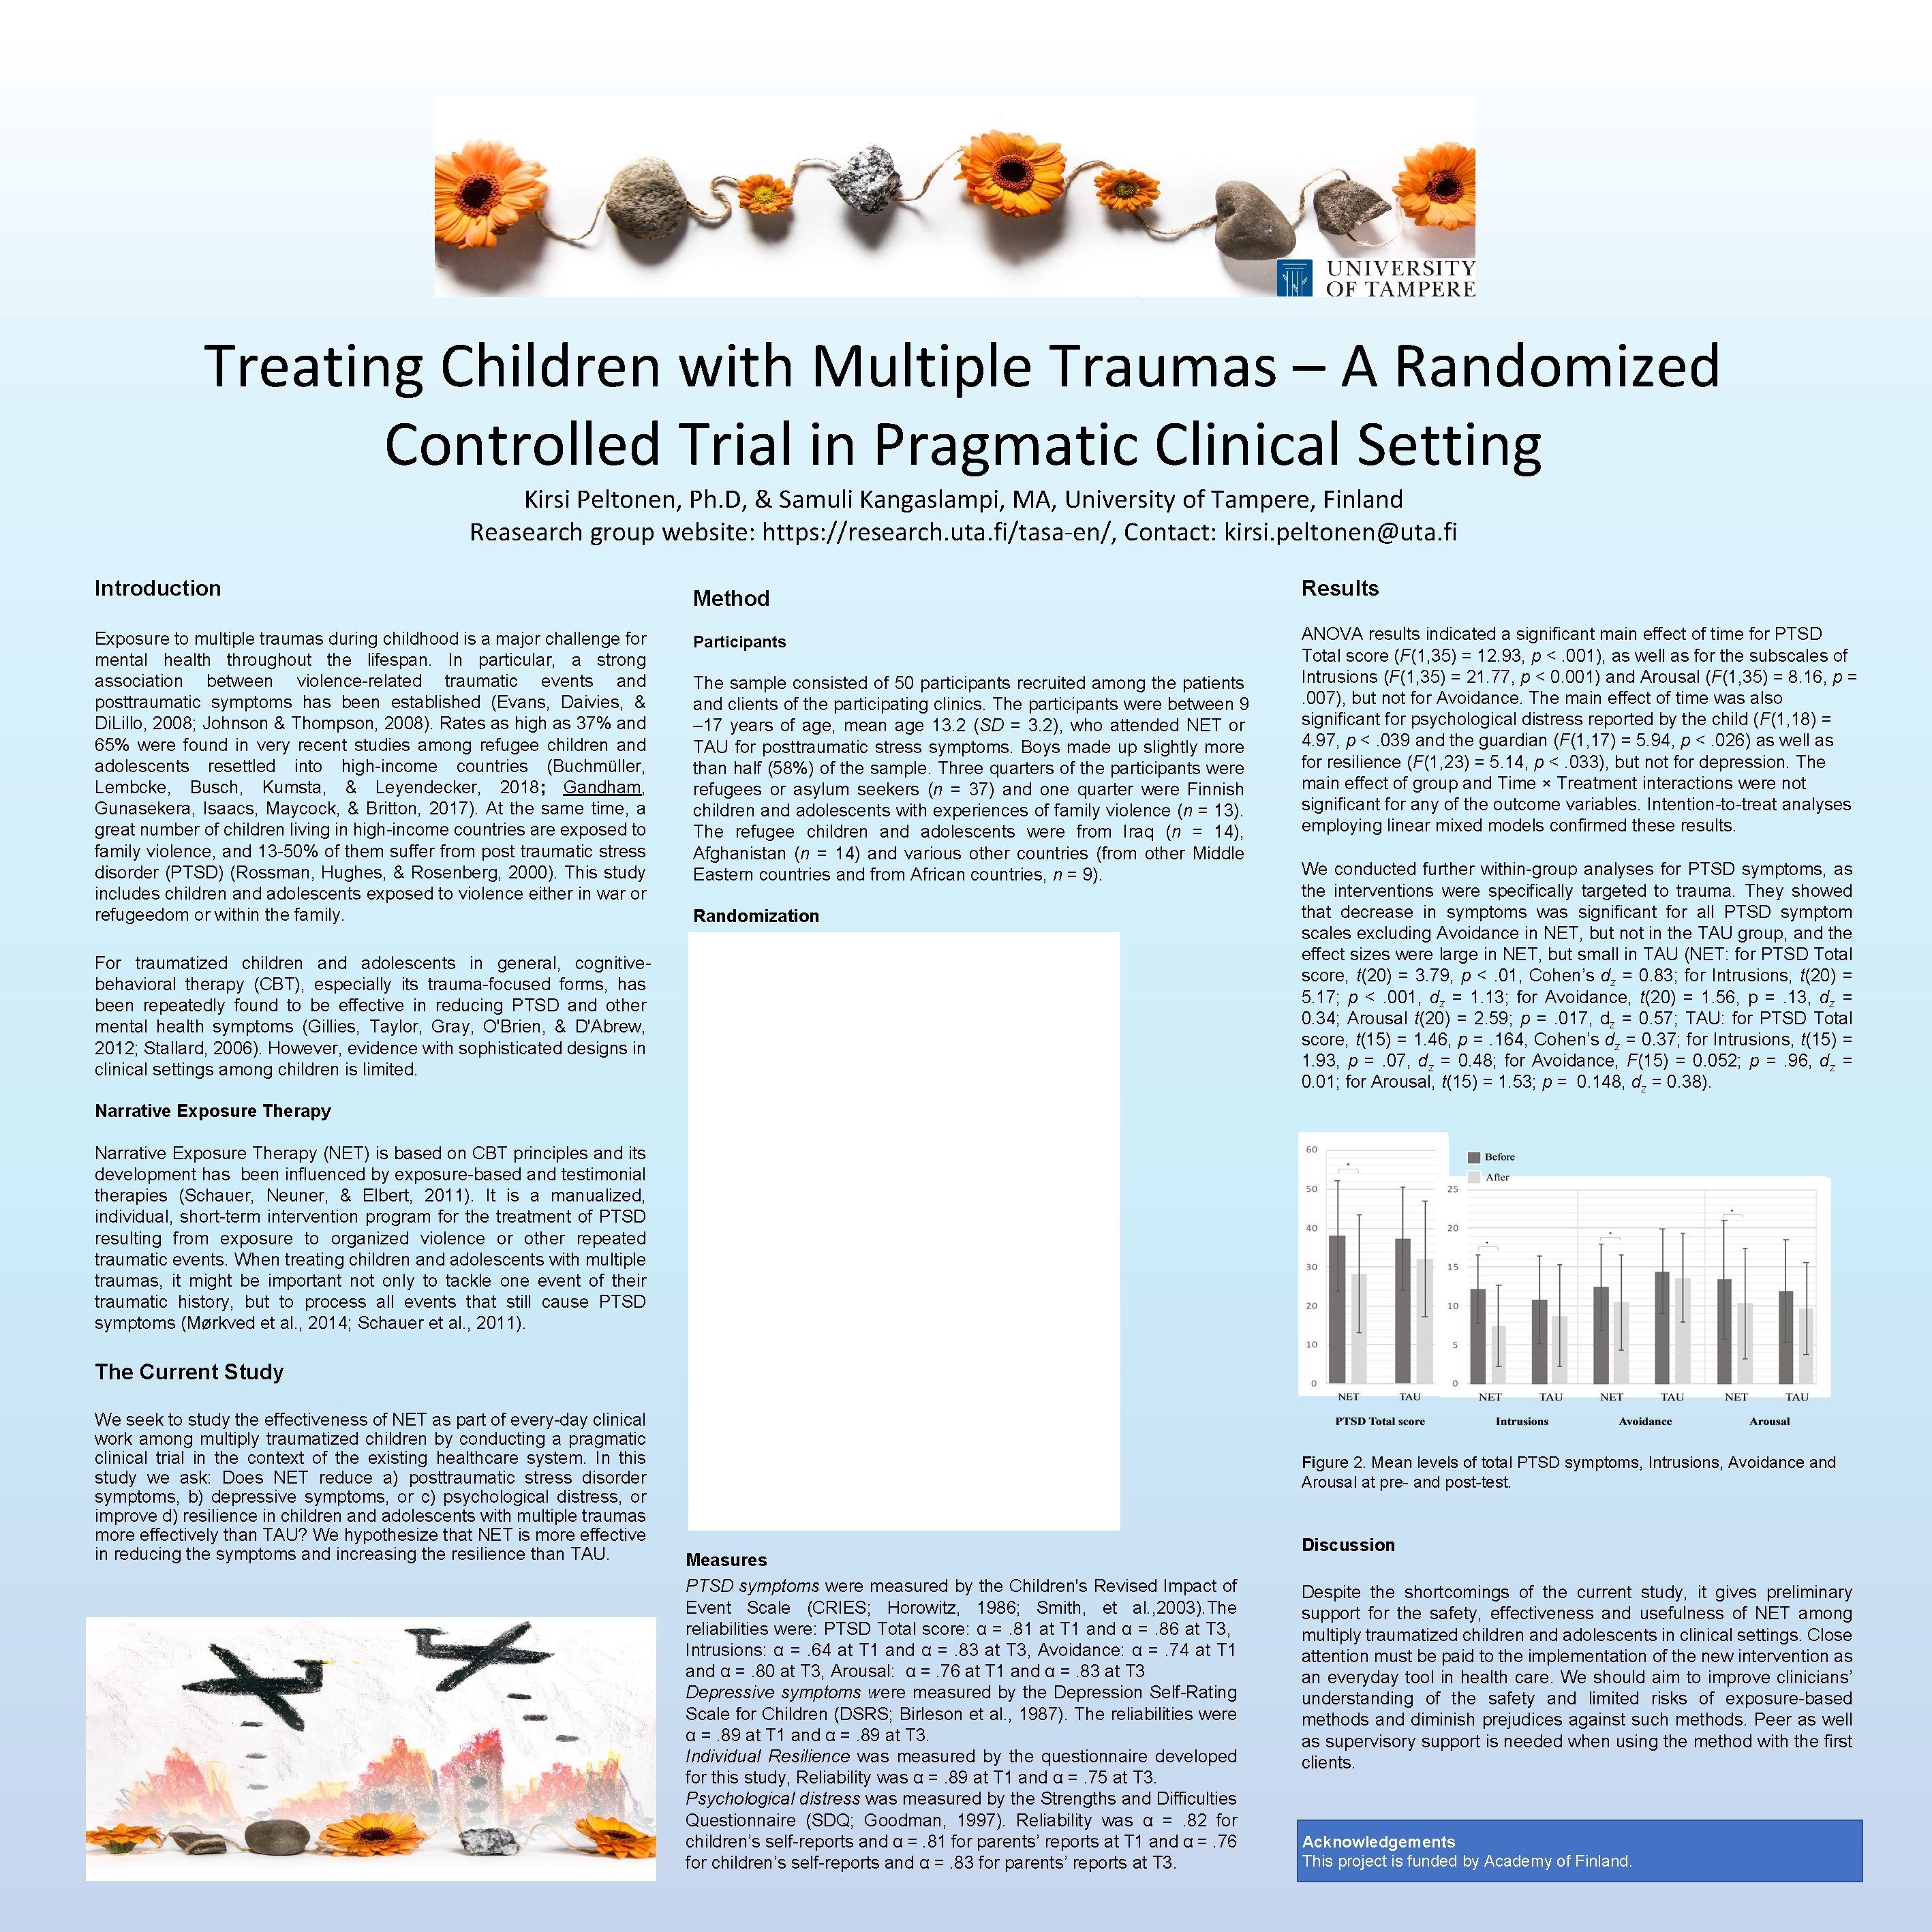 Treating Children with Multiple Traumas – A Randomized Controlled Trial in Pragmatic Clinical Setting